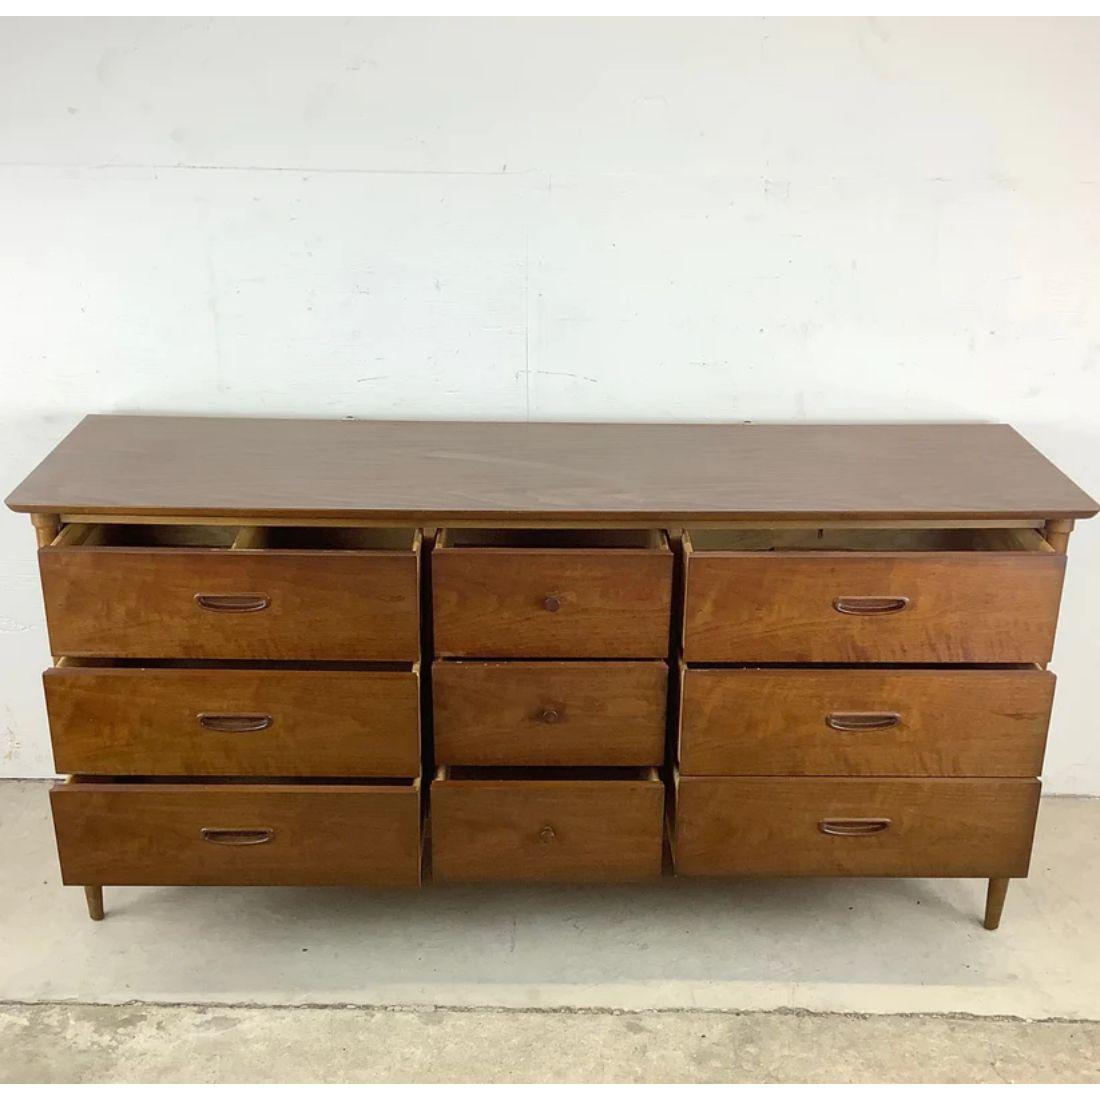 This stylish Lane Furniture bedroom dresser features midcentury design and nine spacious drawers in a striking walnut finish and a durable faux-wood laminate top. The details on the piece include dovetail joints, black trim, and curved drawer pulls